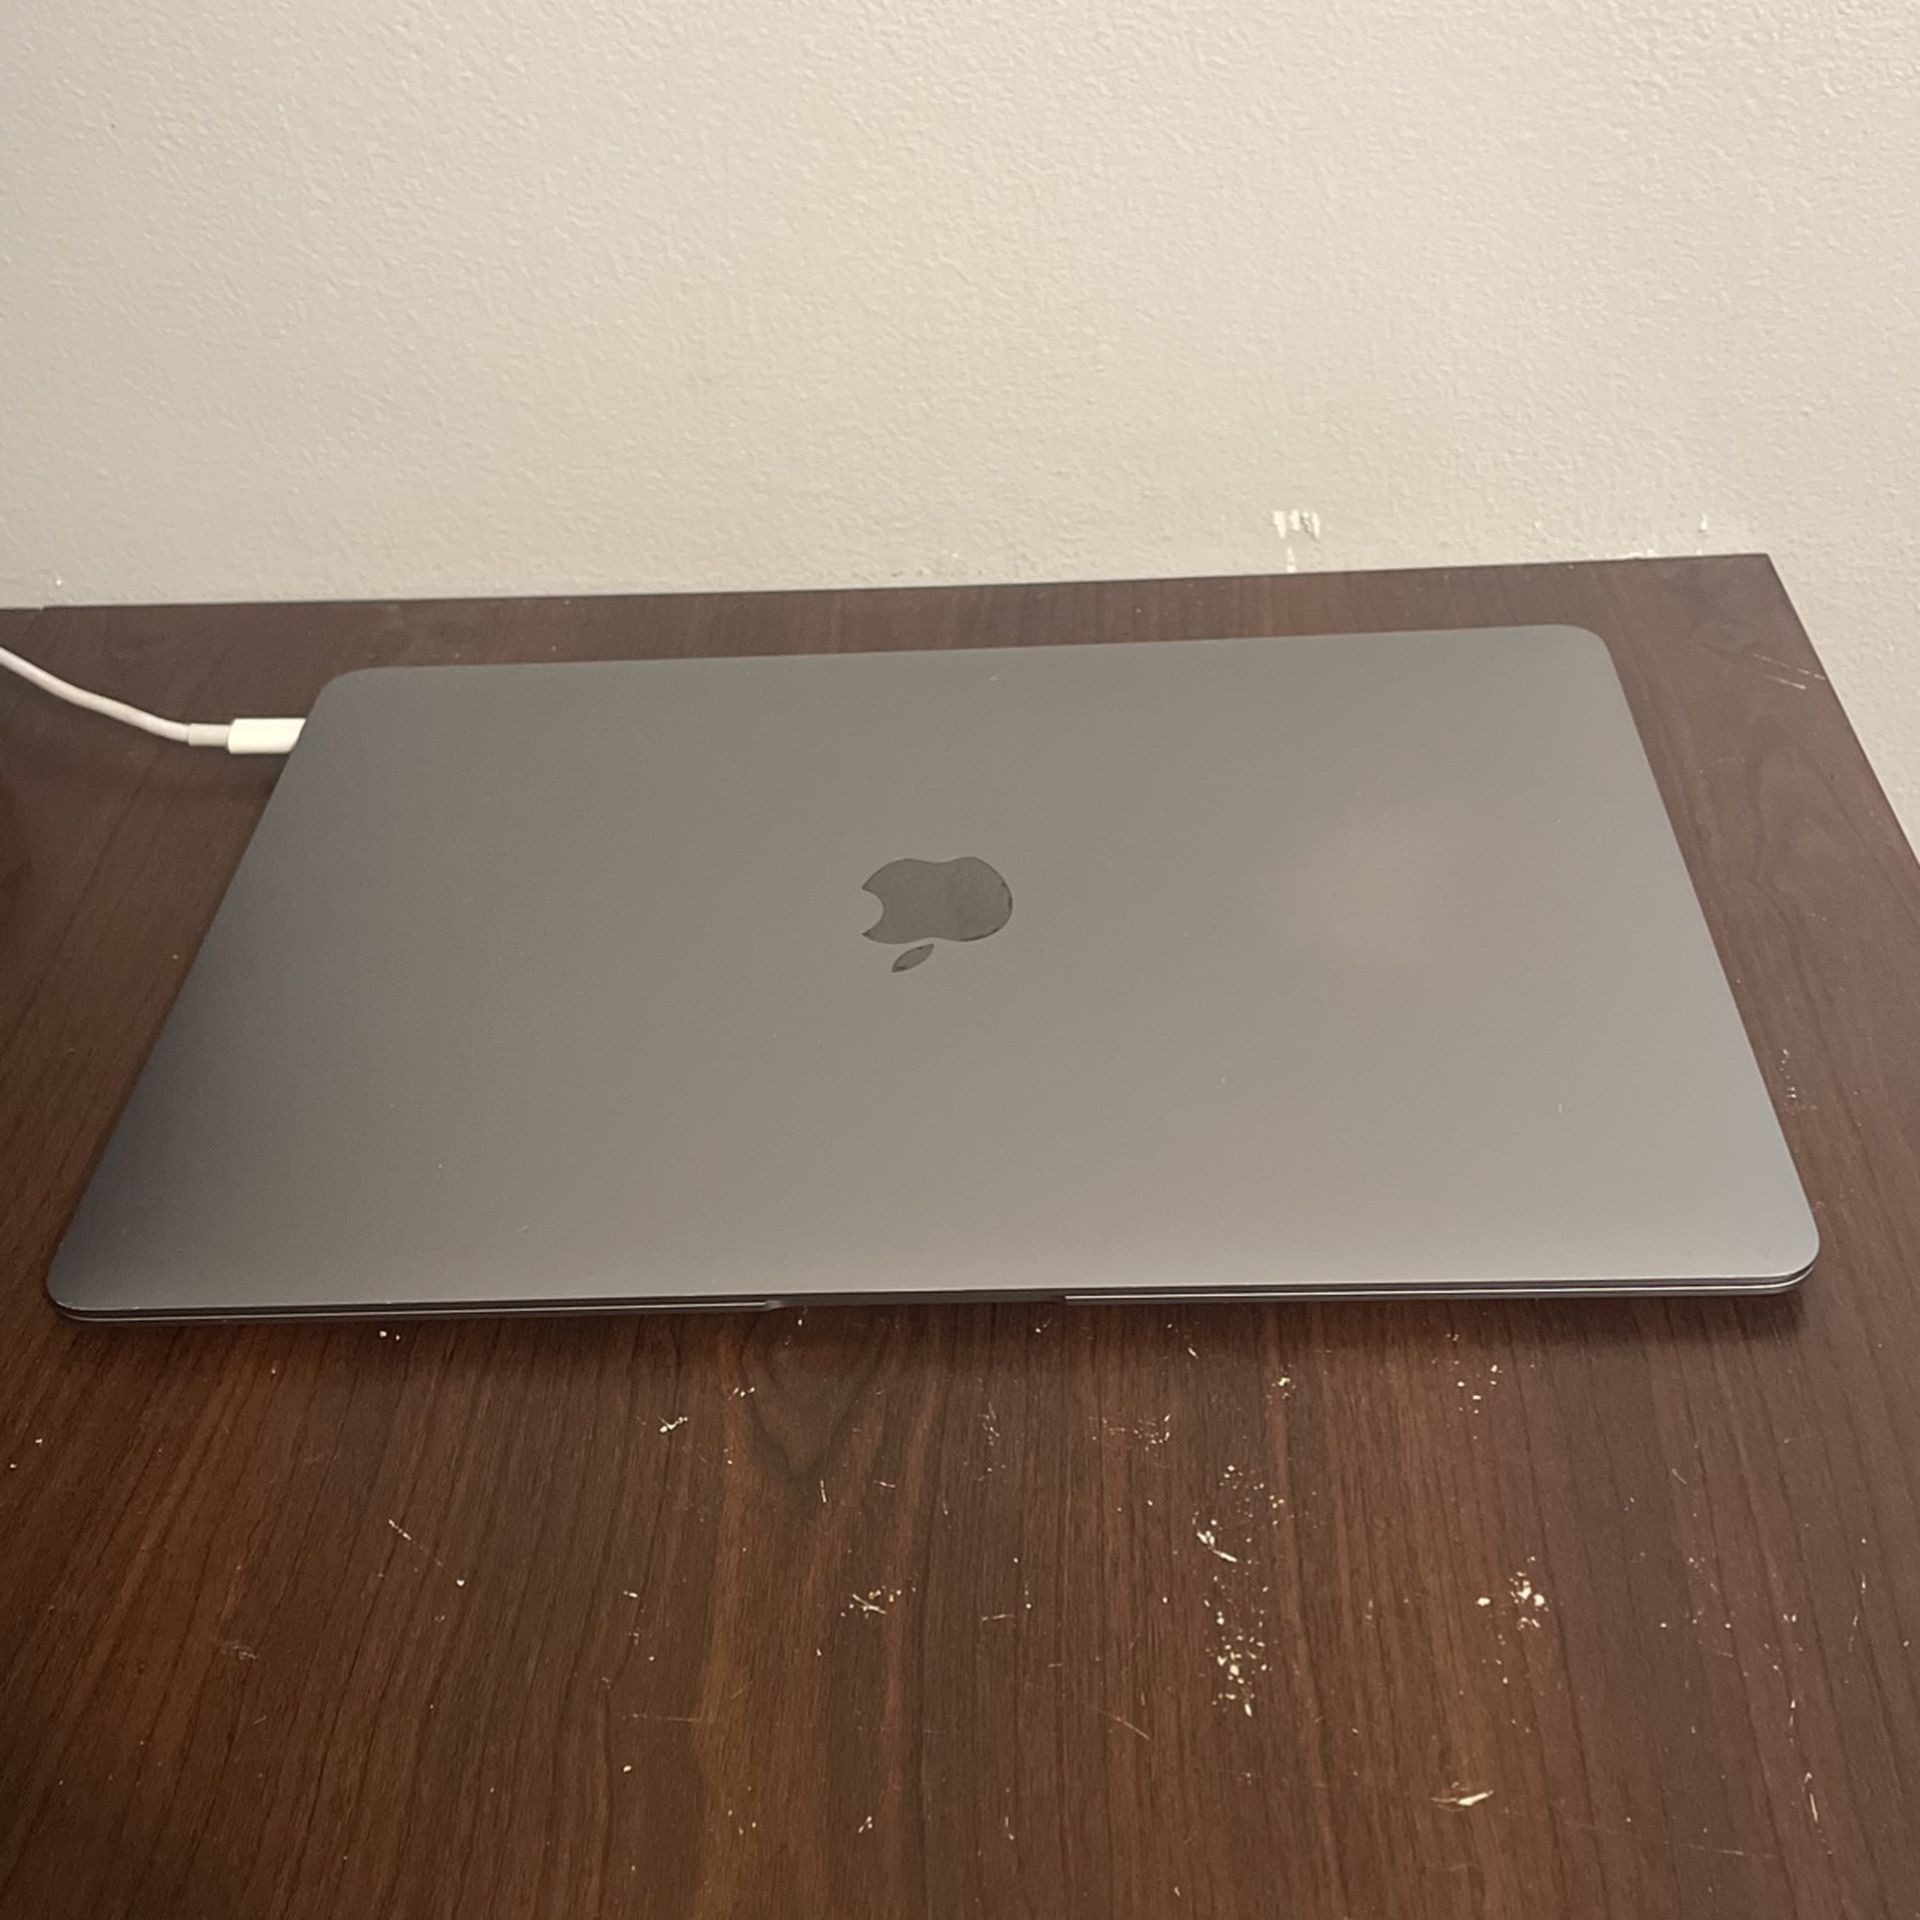 2018 MacBook Air( With Apple Care)